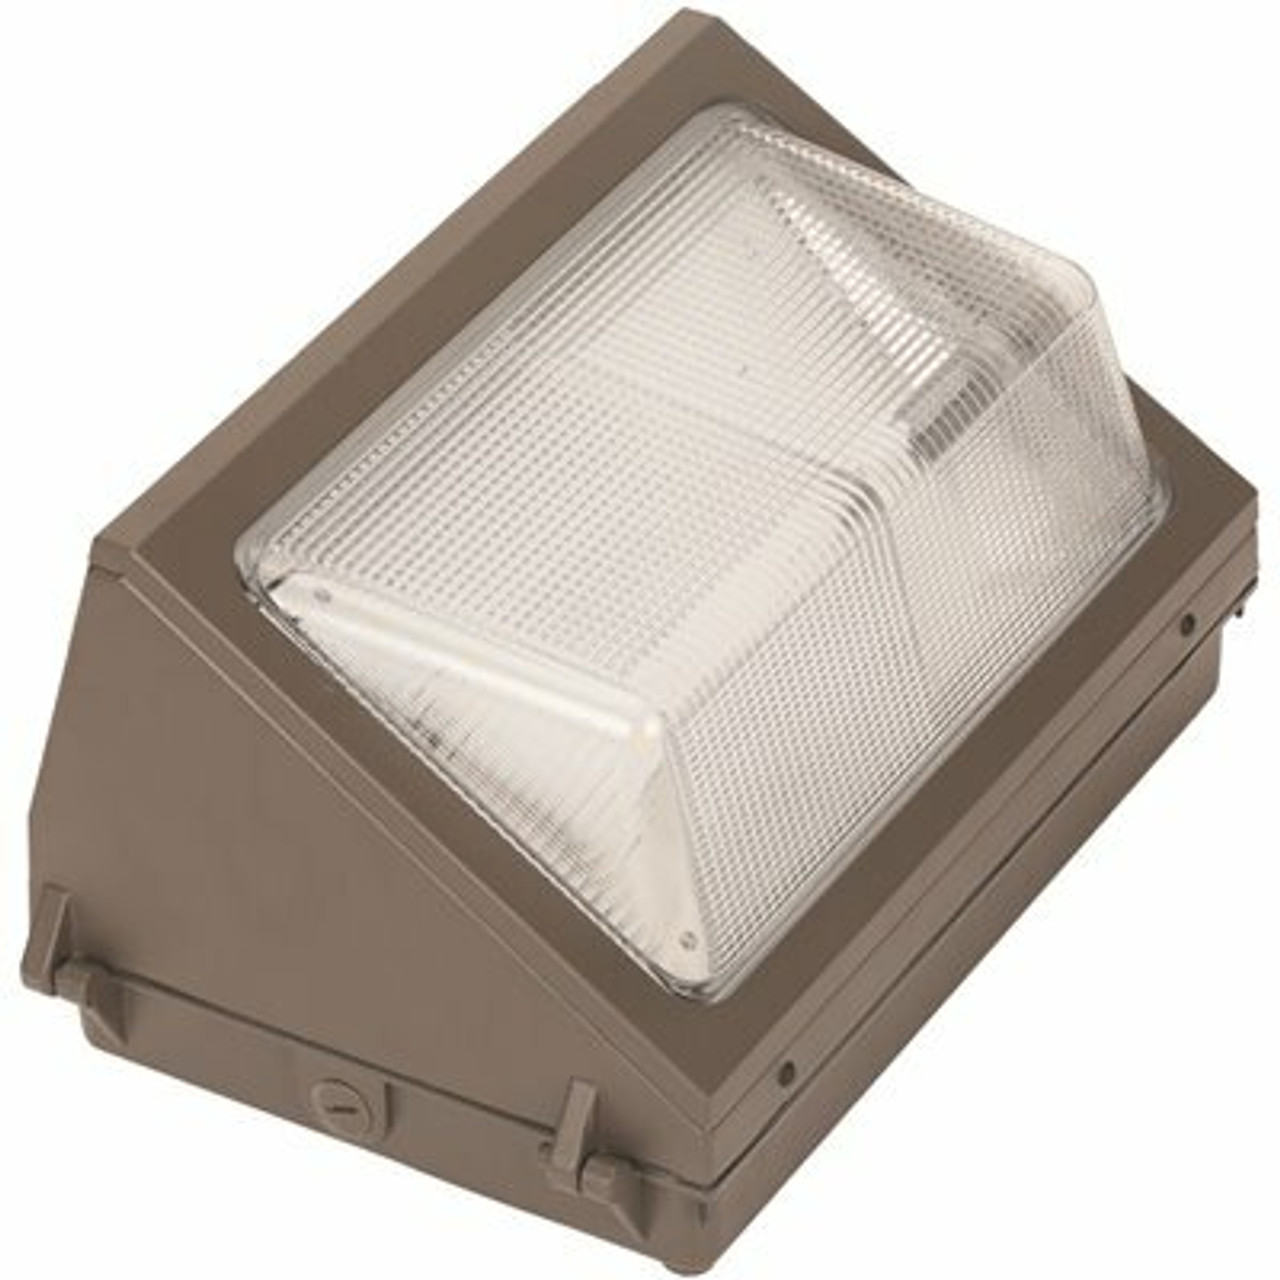 Simply Conserve 150-Watt Mh Equivalent Integrated Led Bronze Dusk To Dawn Wall Pack Light, 5000K